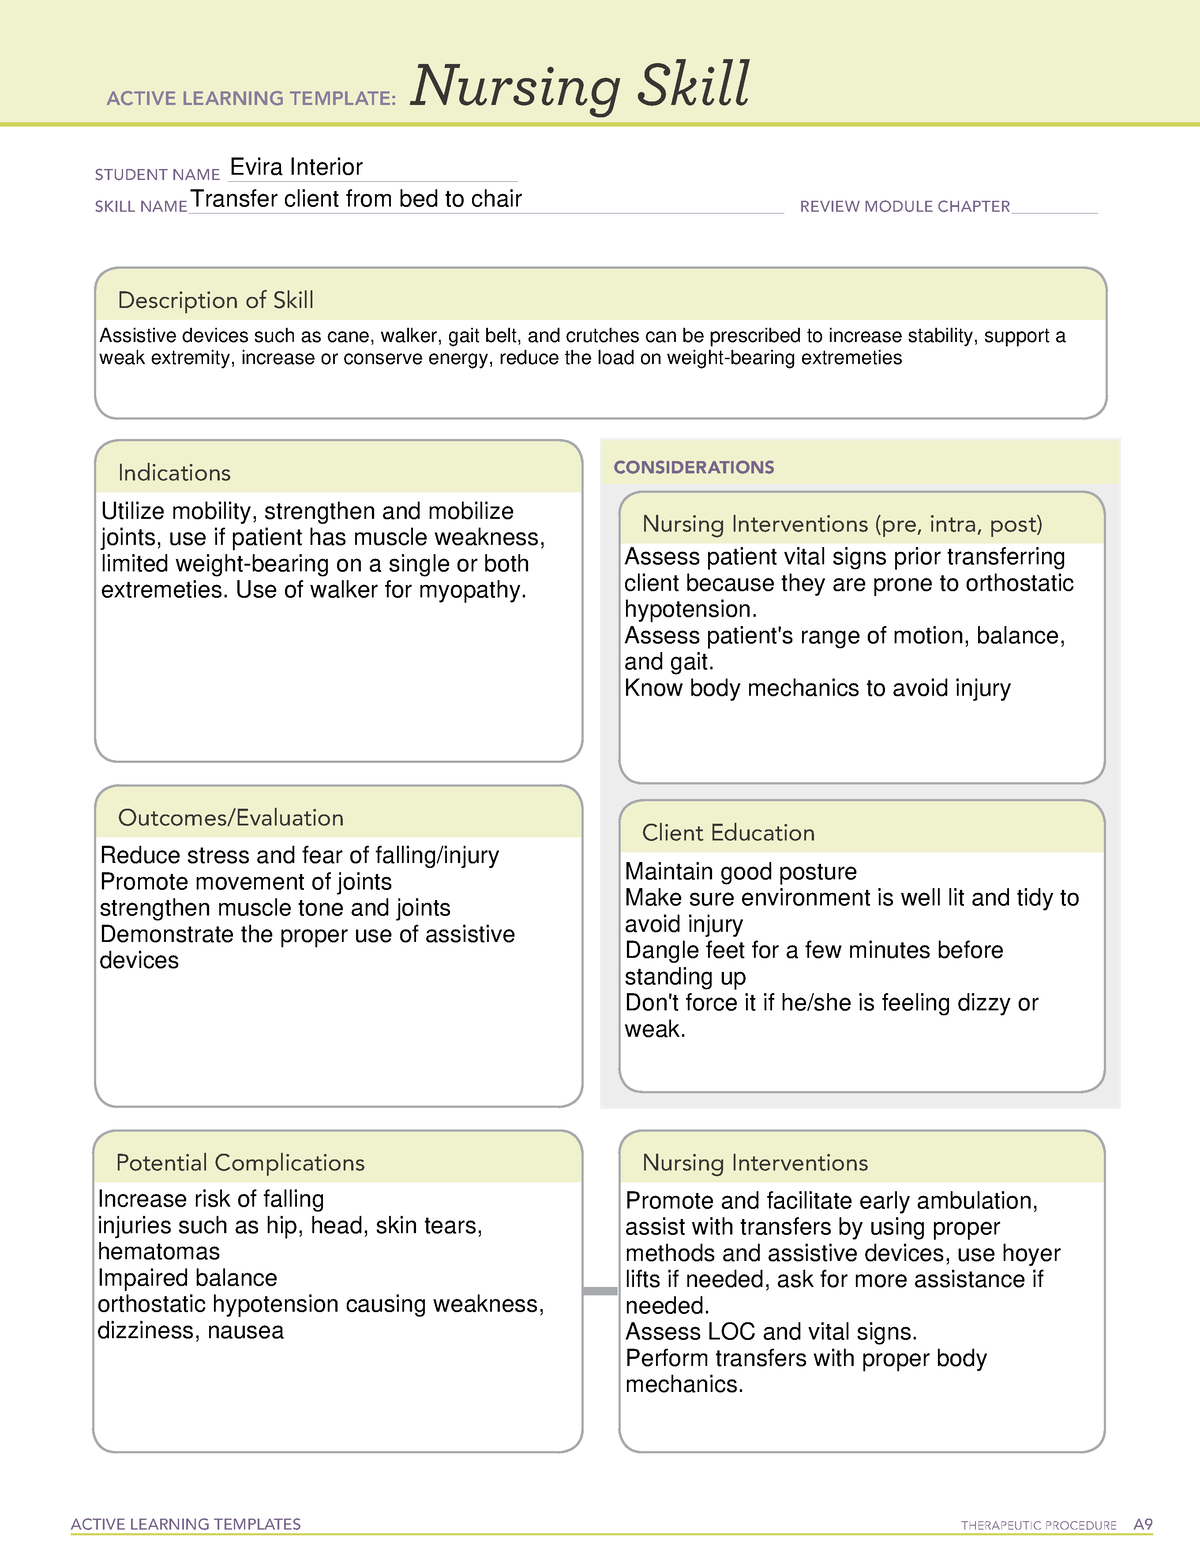 Transfer ALT Nursing Skill form - ACTIVE LEARNING TEMPLATES THERAPEUTIC ...